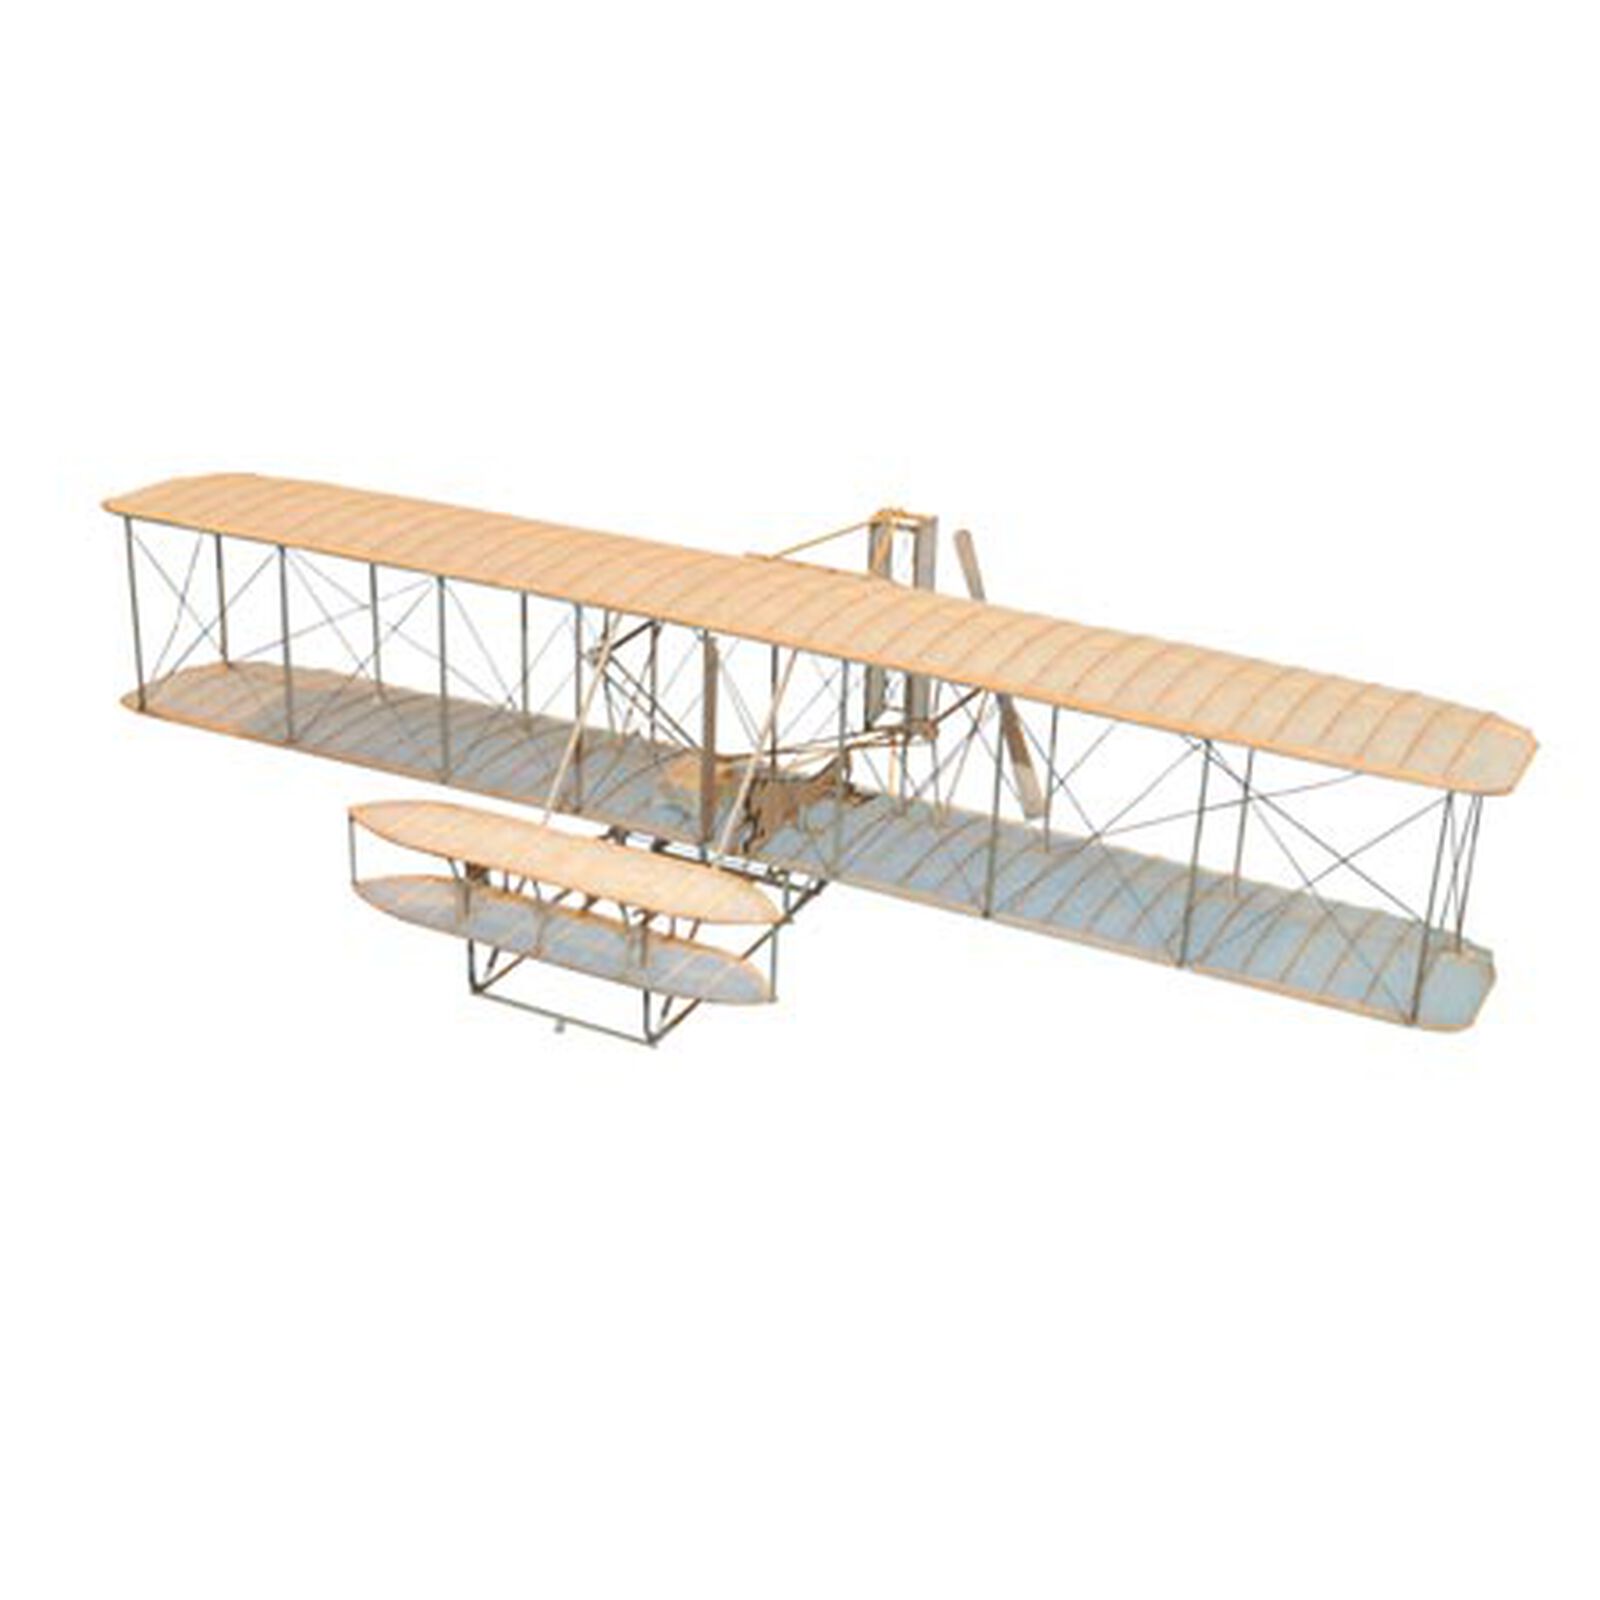 1903 Wright Brothers Flyer Kit, 24"